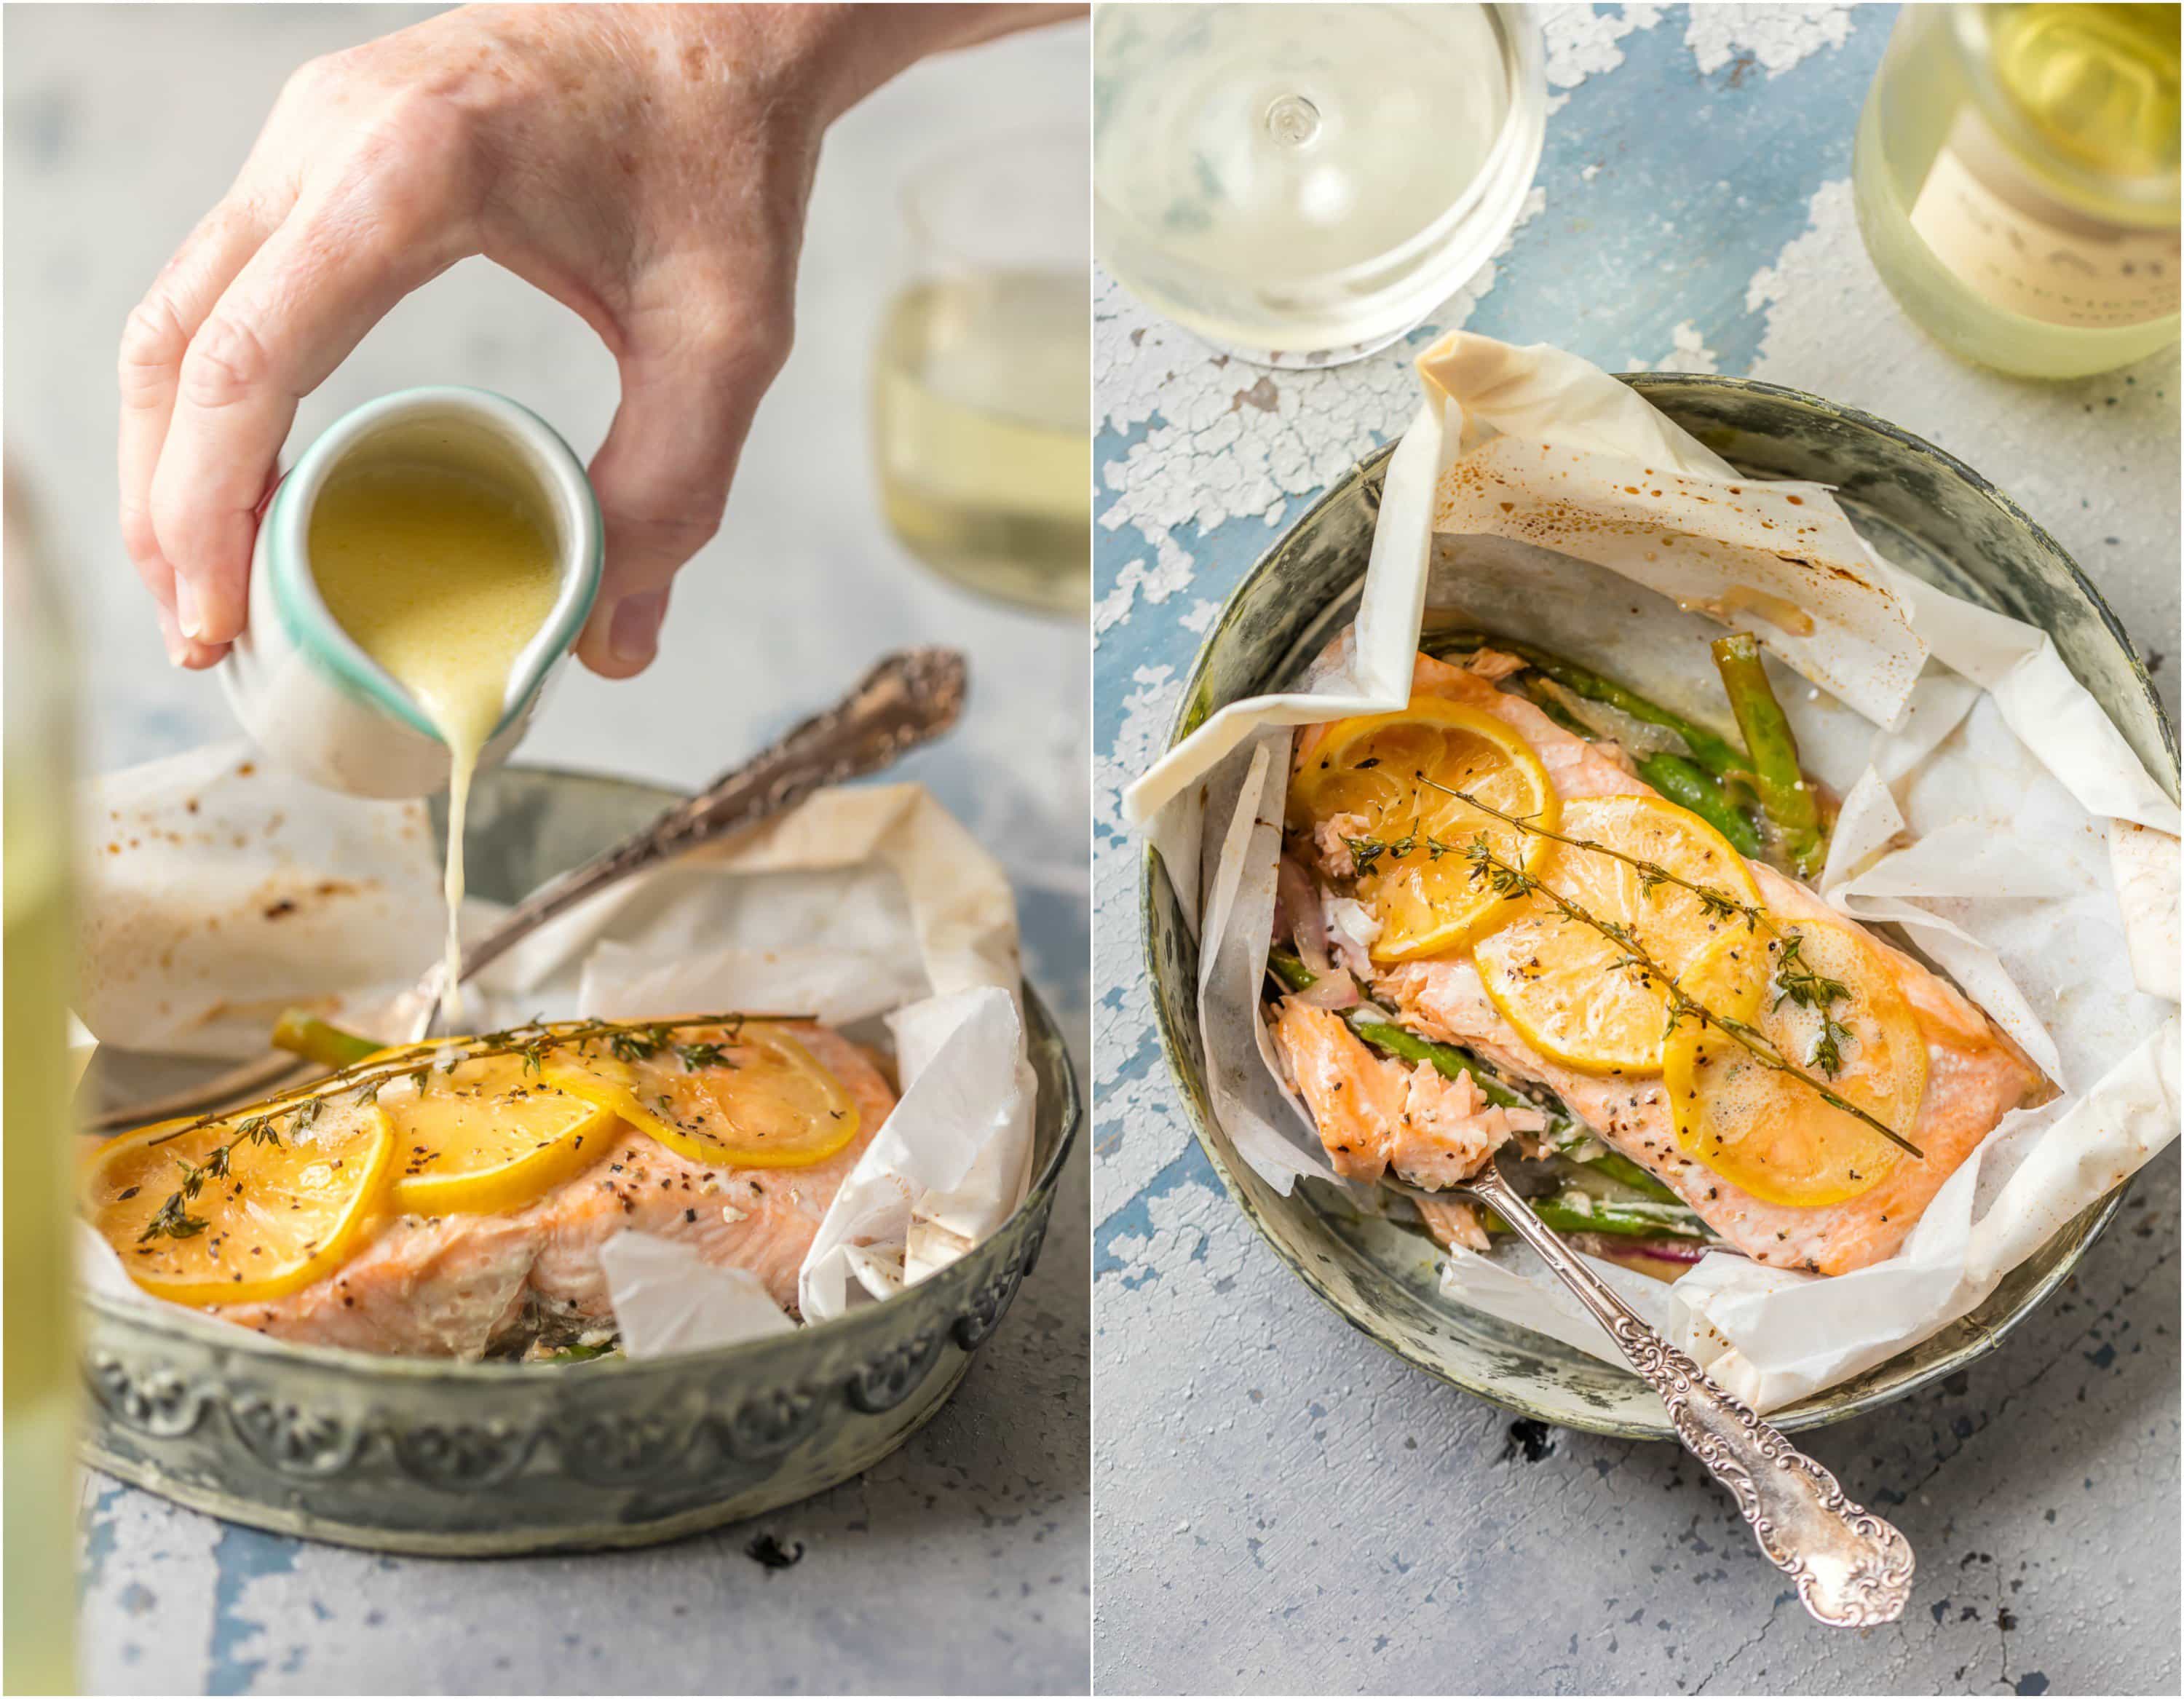 lemon butter being poured on salmon